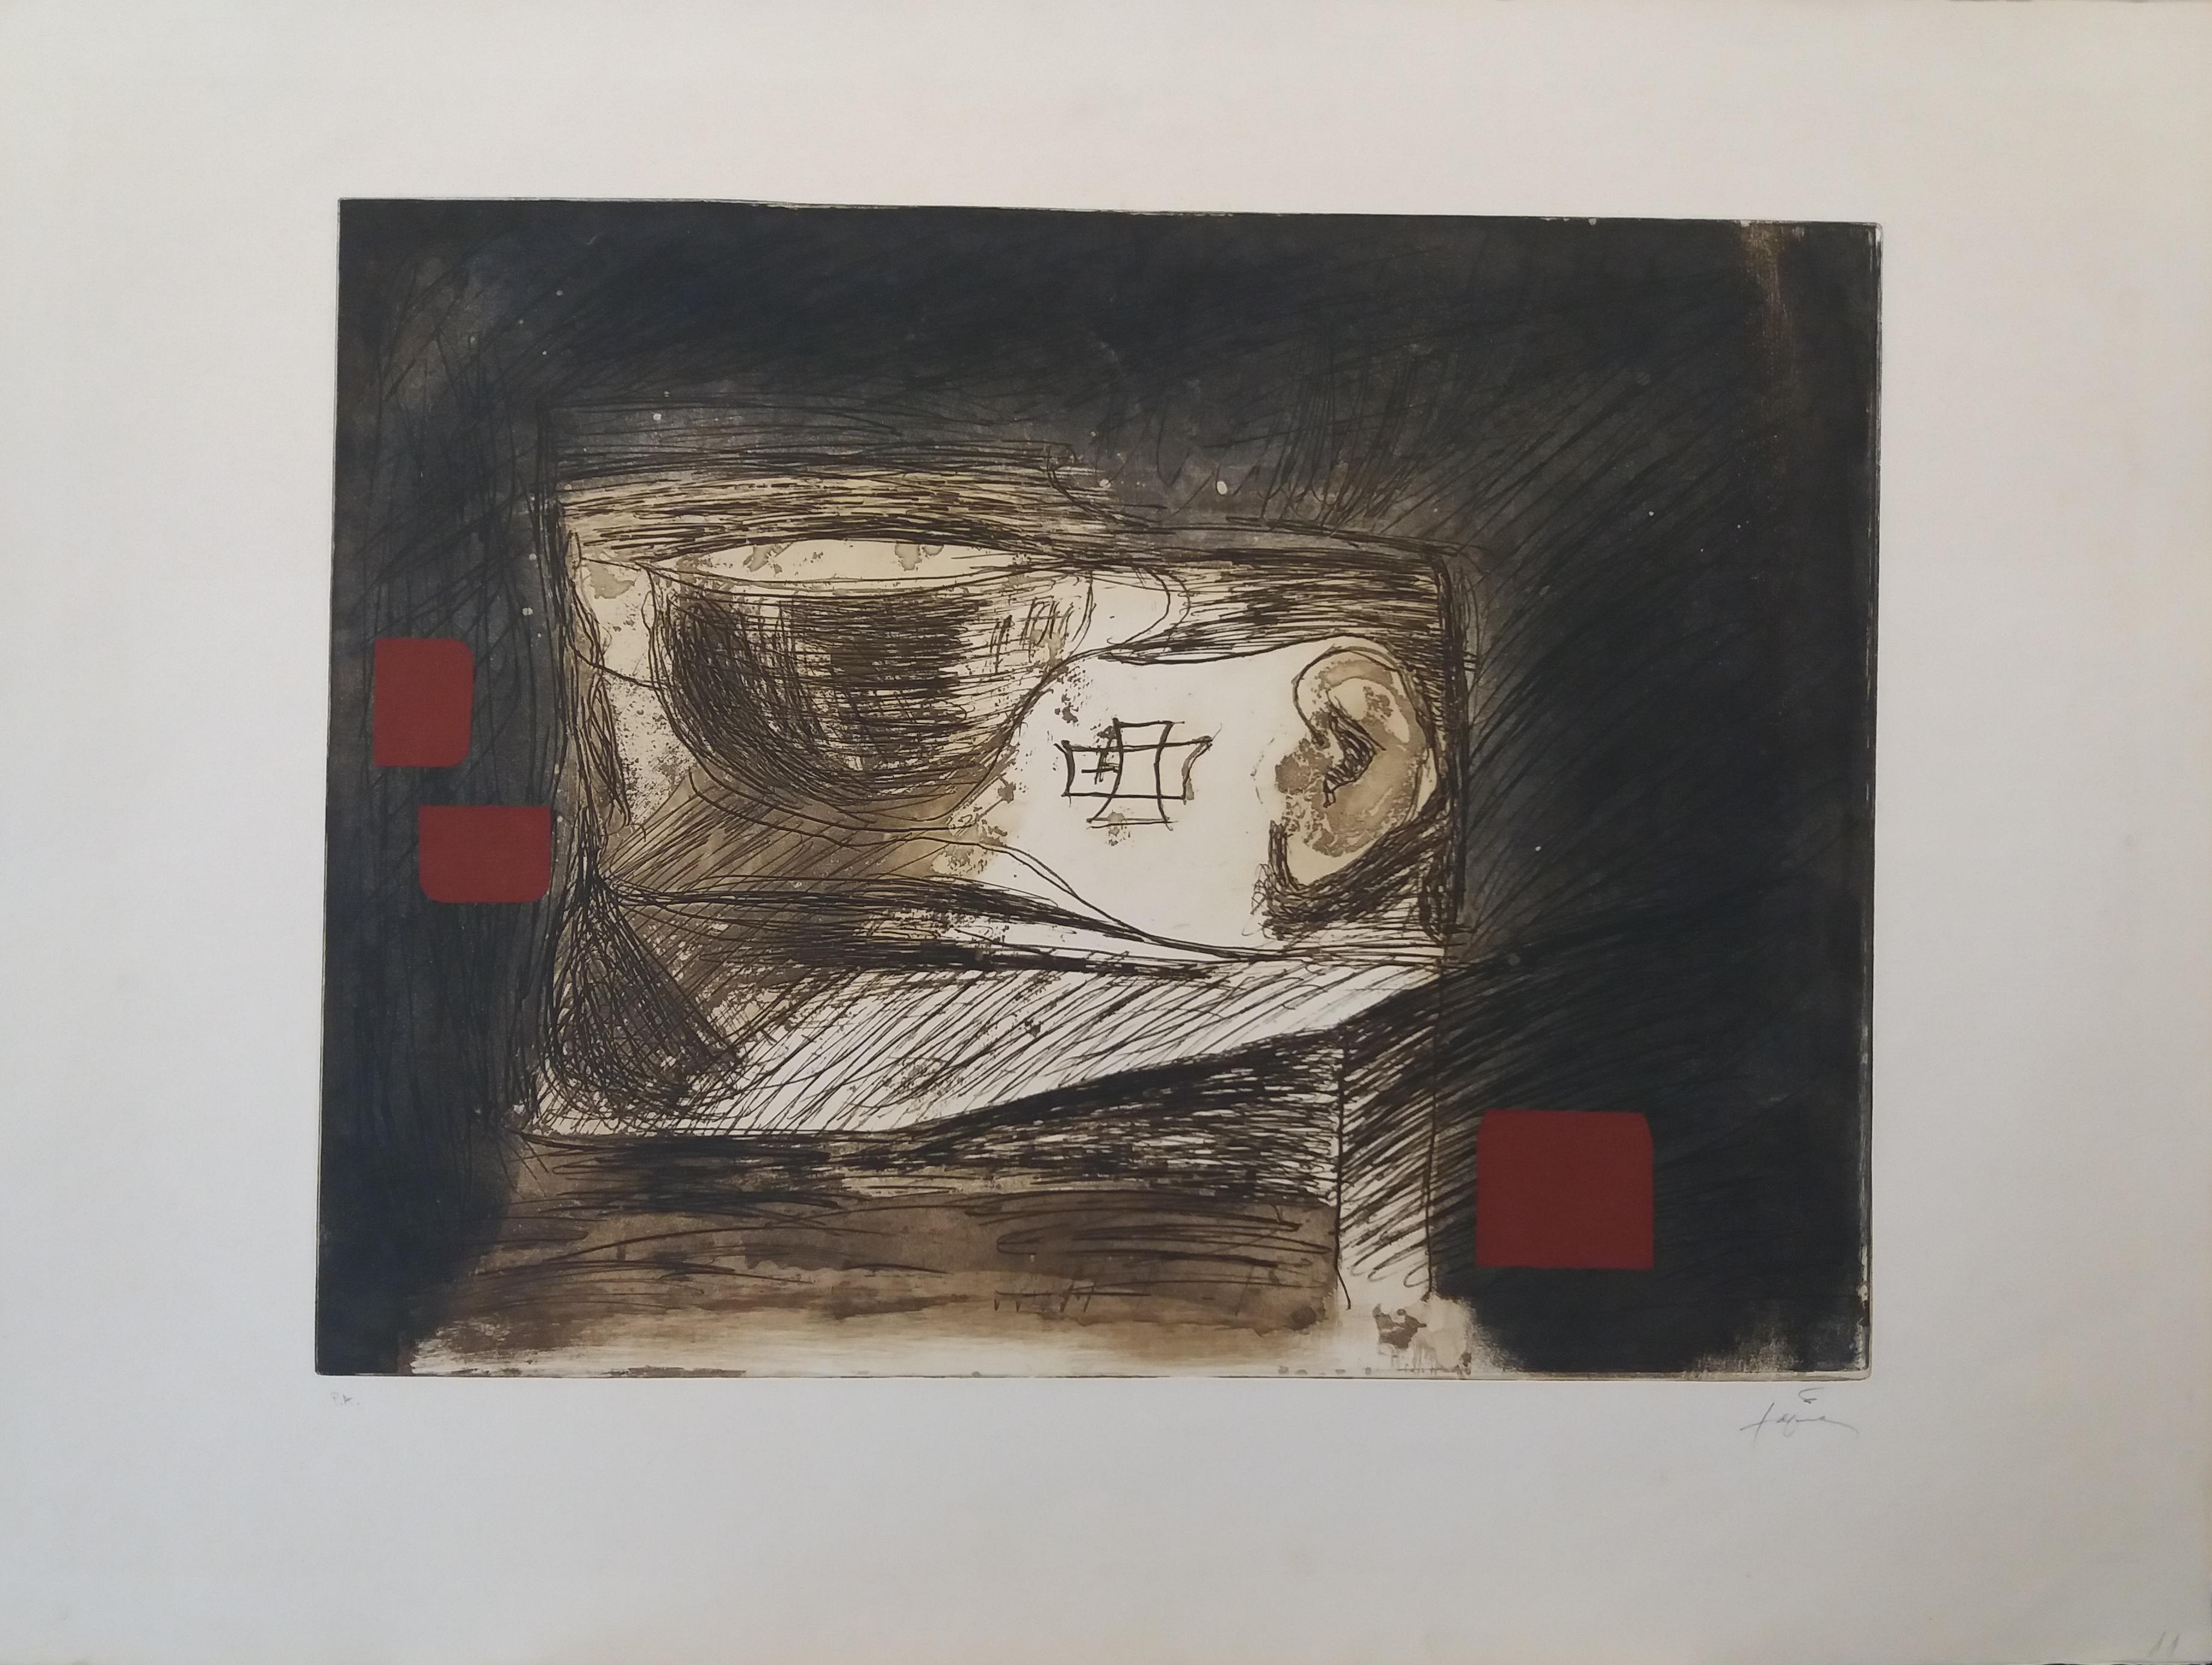 LLull i Tapies original engraving painting - Abstract Print by Antoni Tàpies